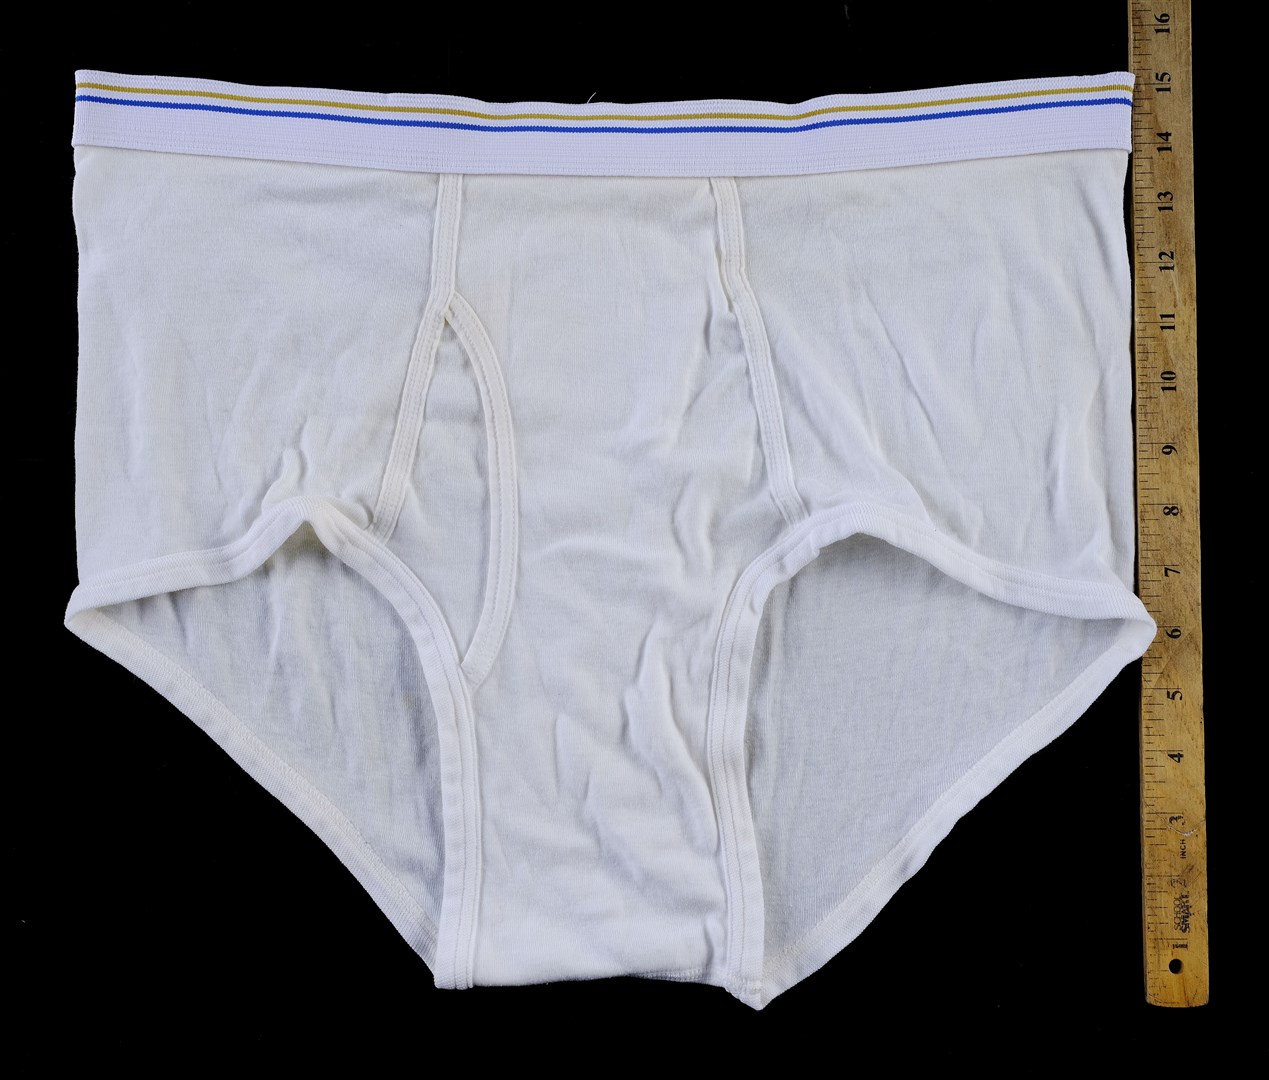 A pair of underwear worn by Bryan Cranston is part of the online auction (Propstore/PA)